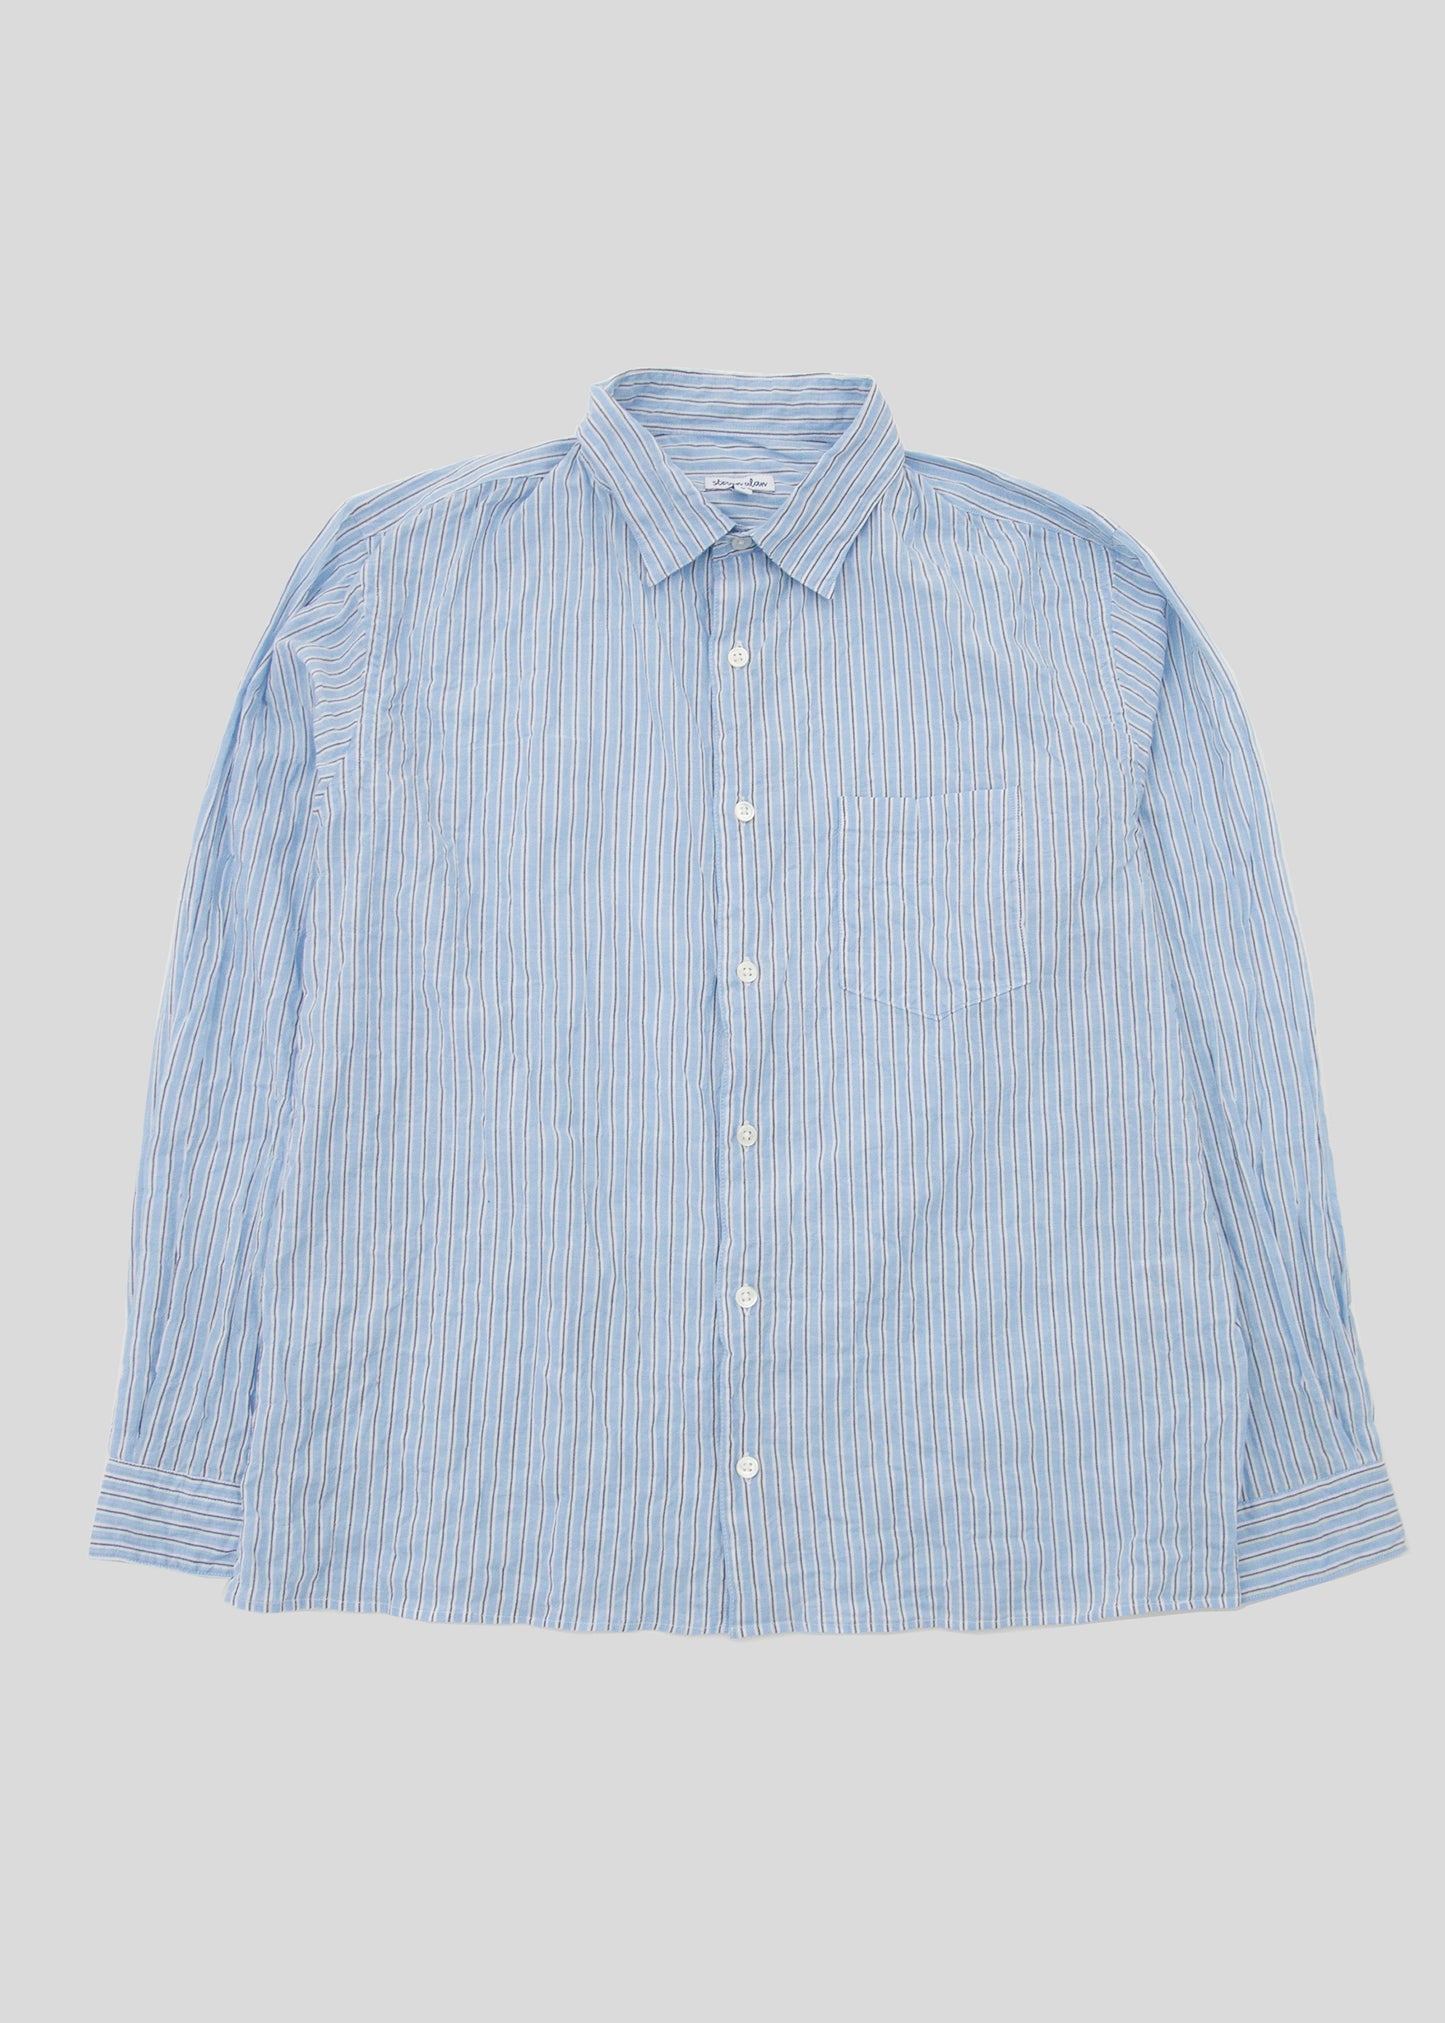 Front flat lay of notch shirt in color light blue stripe